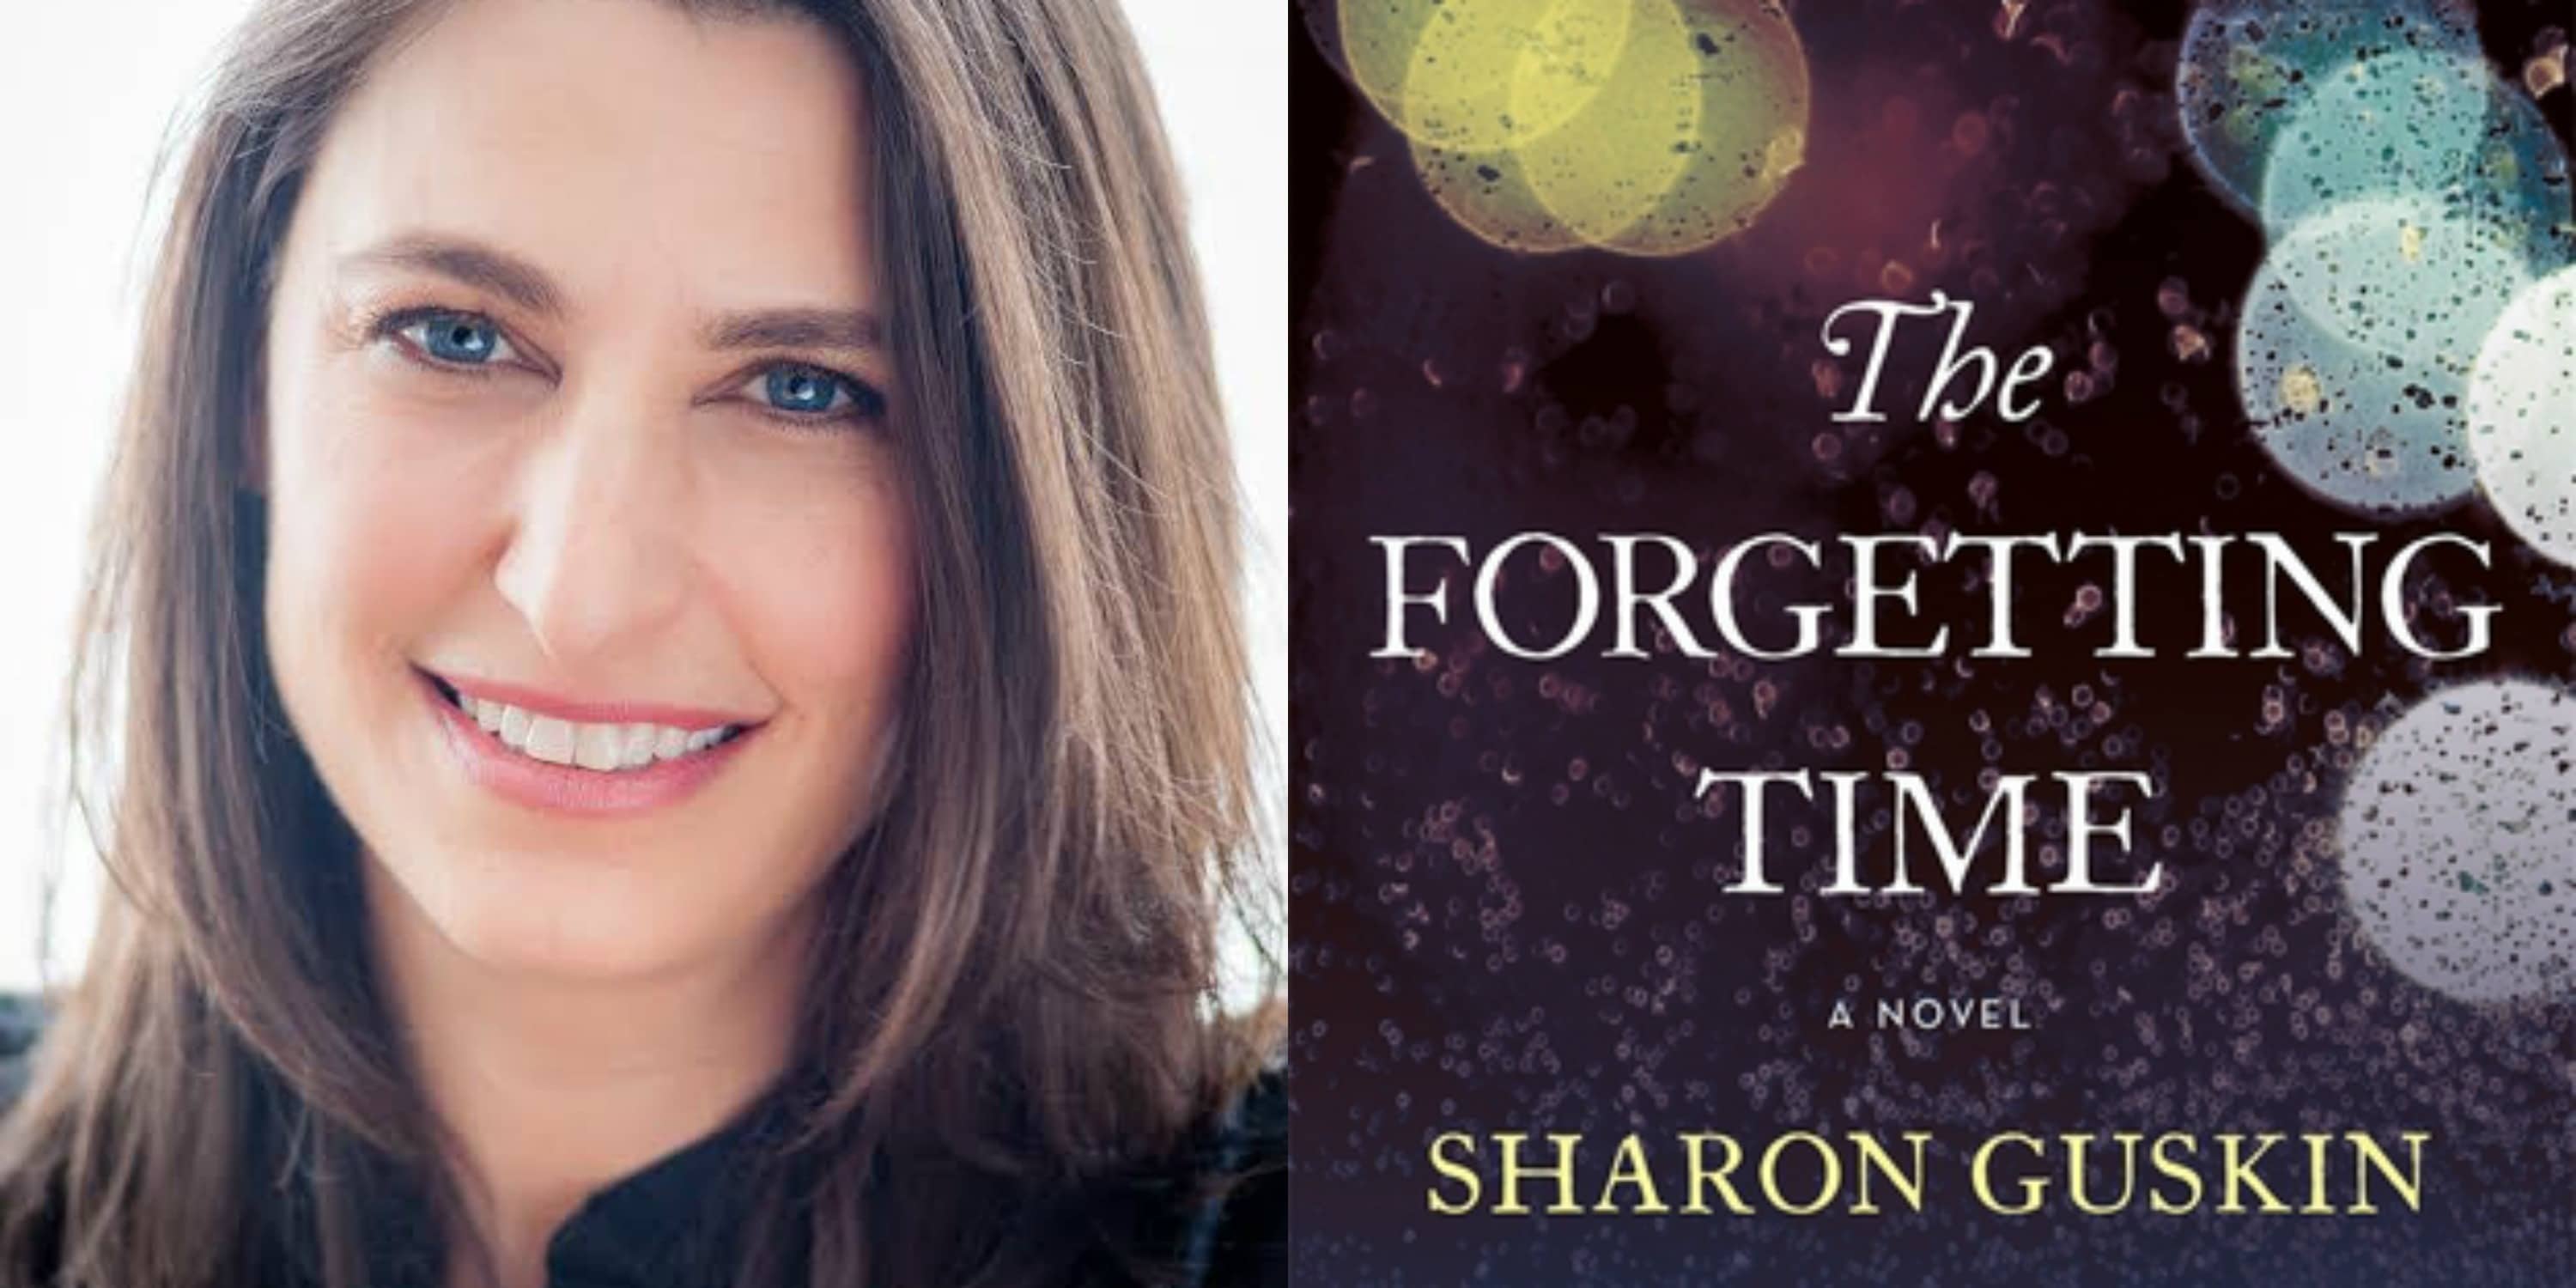 Sundays With Writers: The Forgetting Time by Sharon Guskin